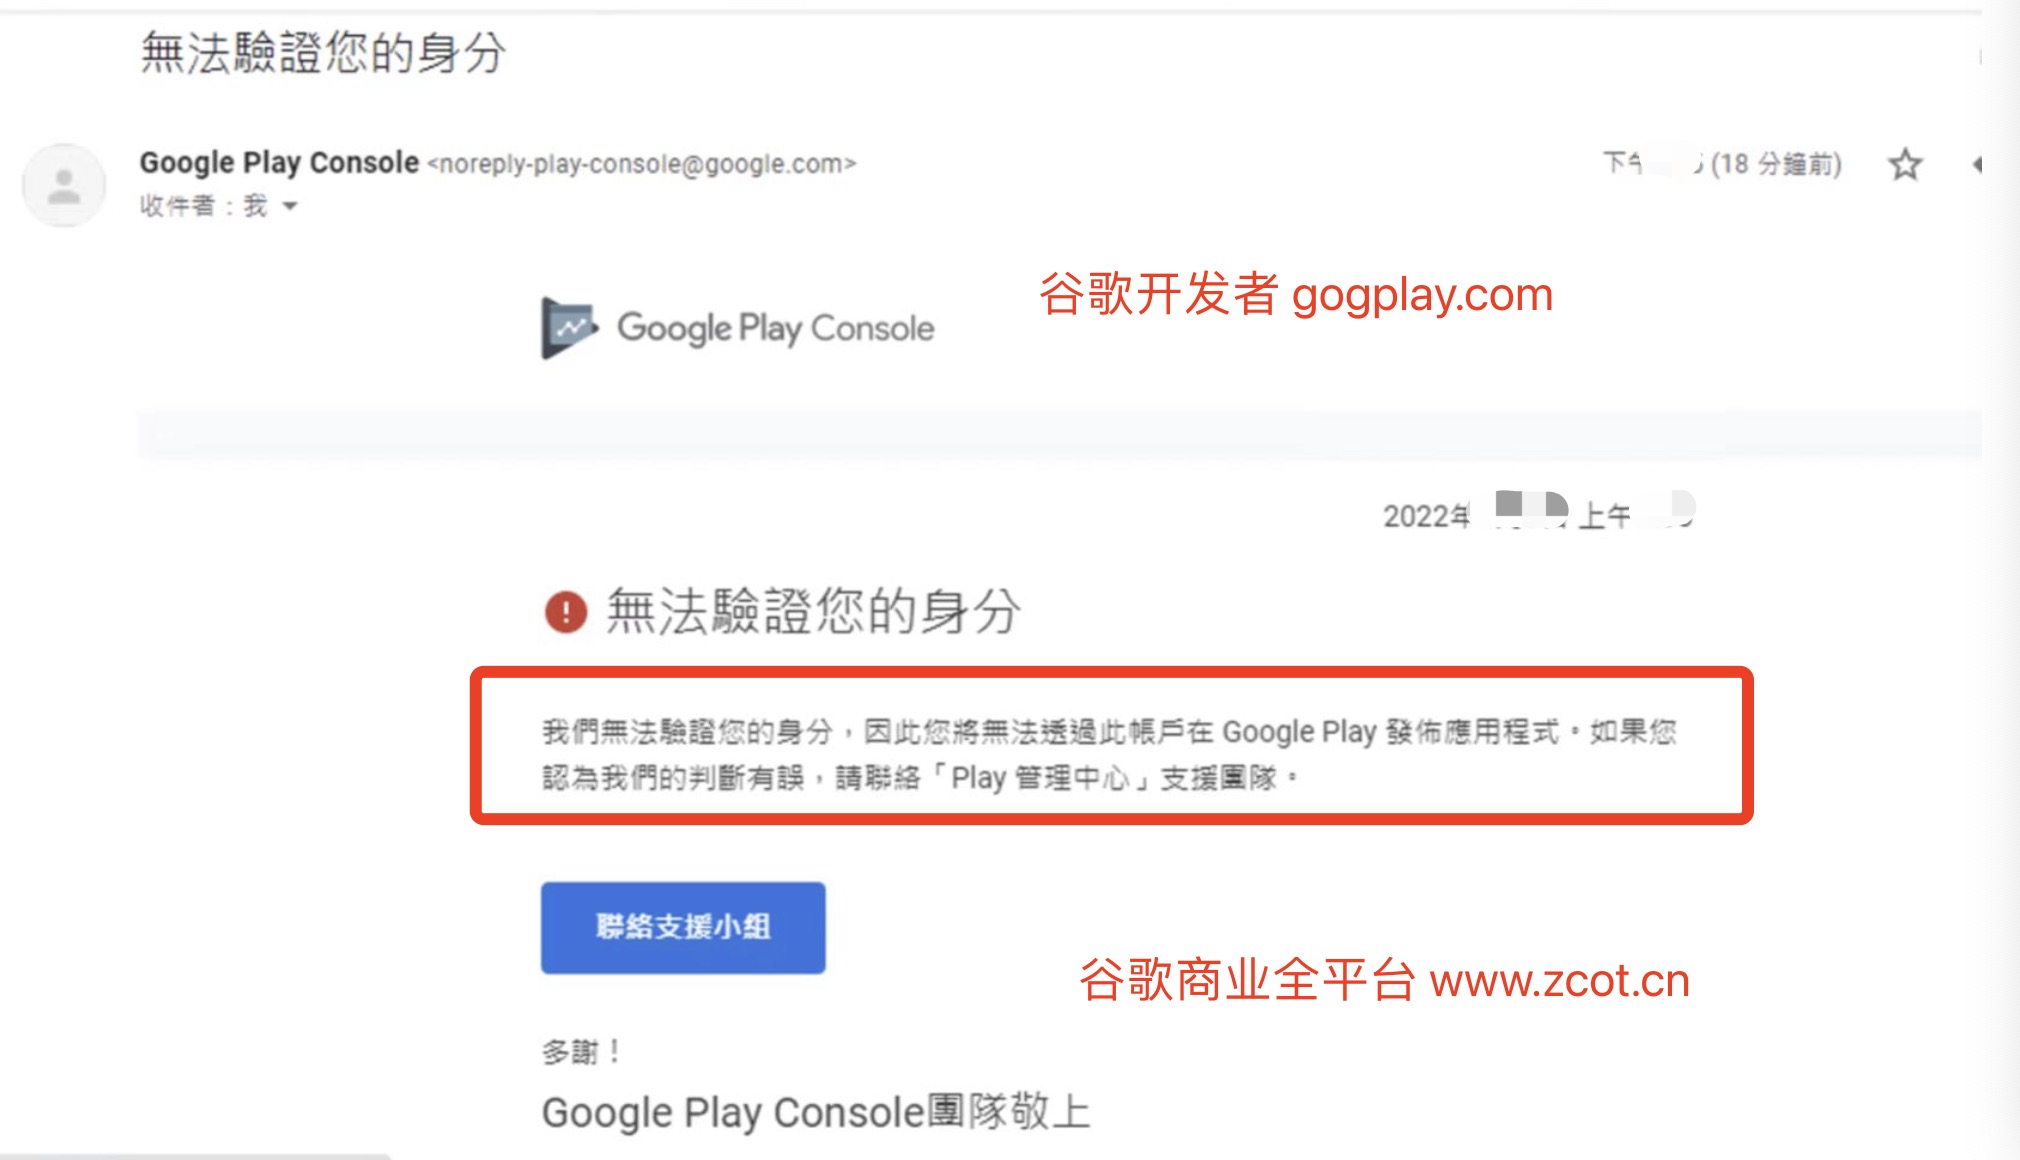 Google play authentication failed: we cannot verify your identity, so you will not be able to publish applications on google play with this account